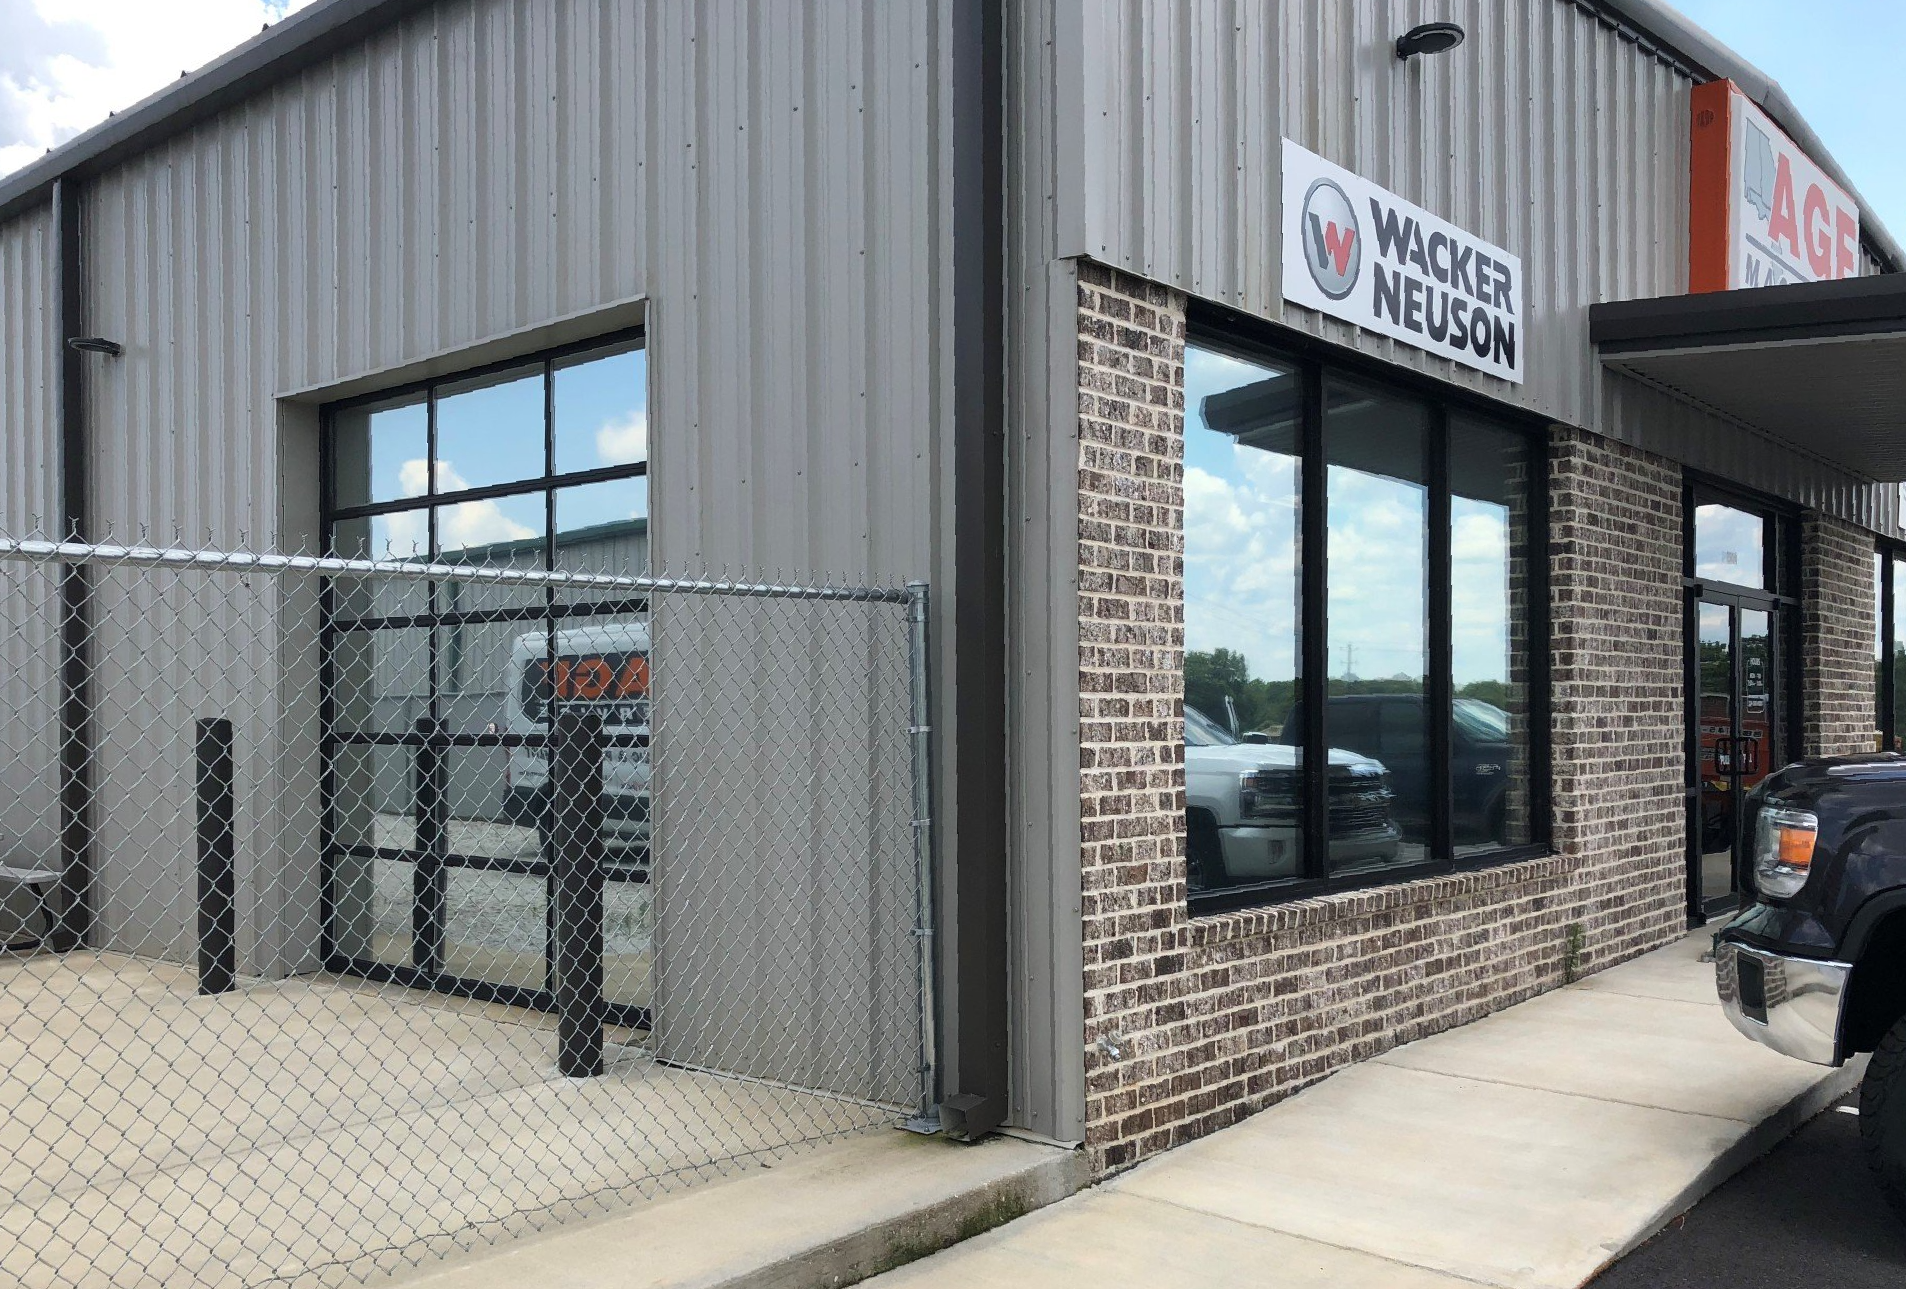 Professional office tinting service - business windows and doors tinted in Enterprise, AL - 2018